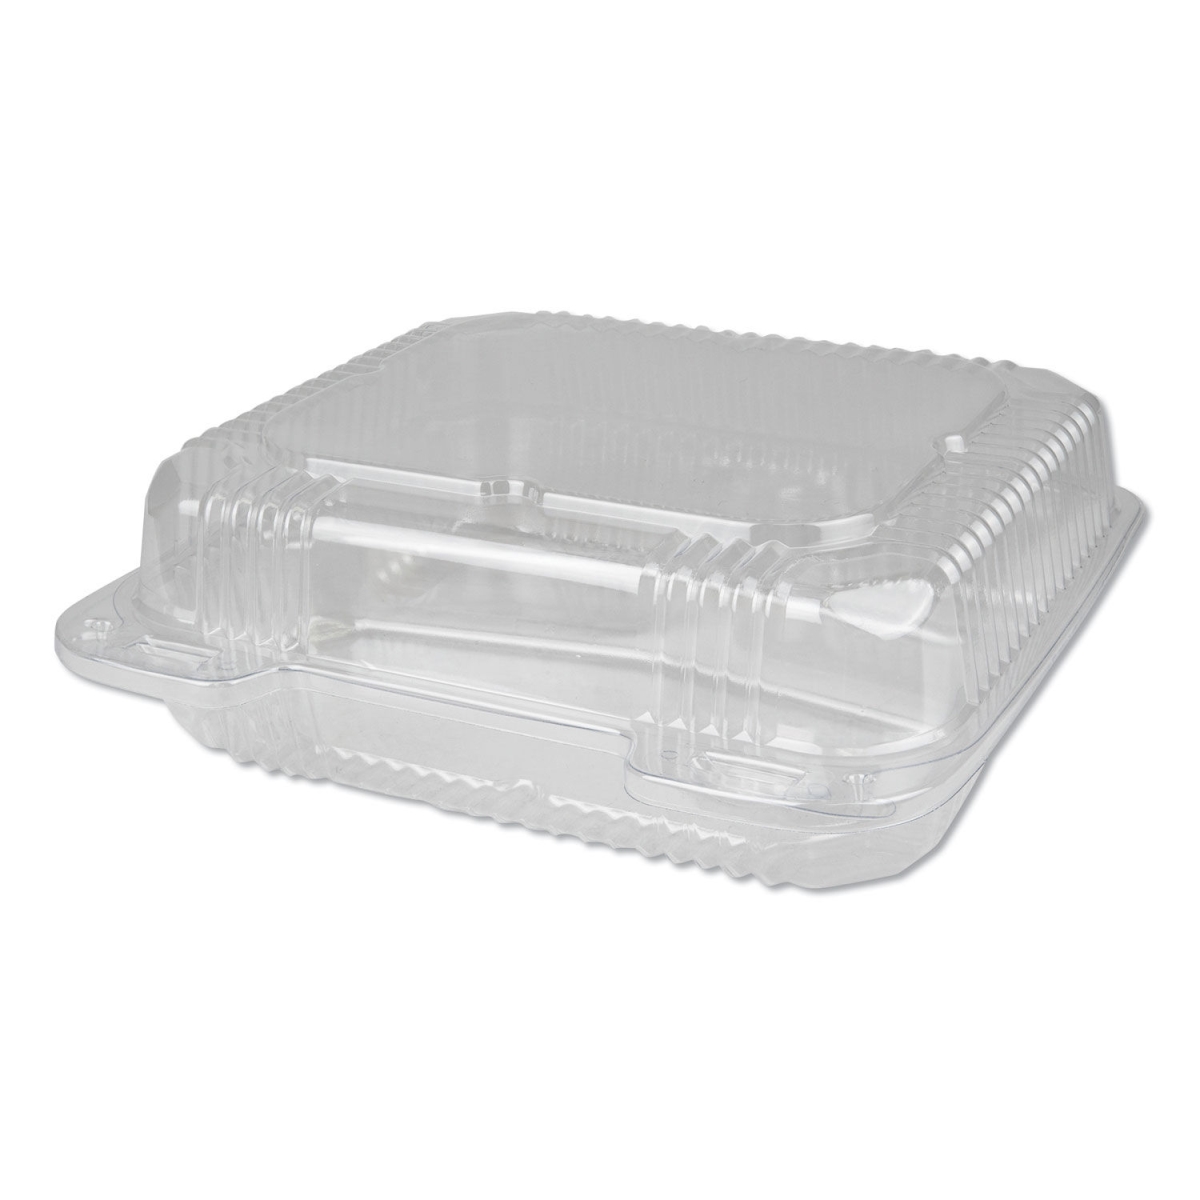 Dpkpxt833 15 Oz 8 In. Container 3-compartment Hinged, Clear